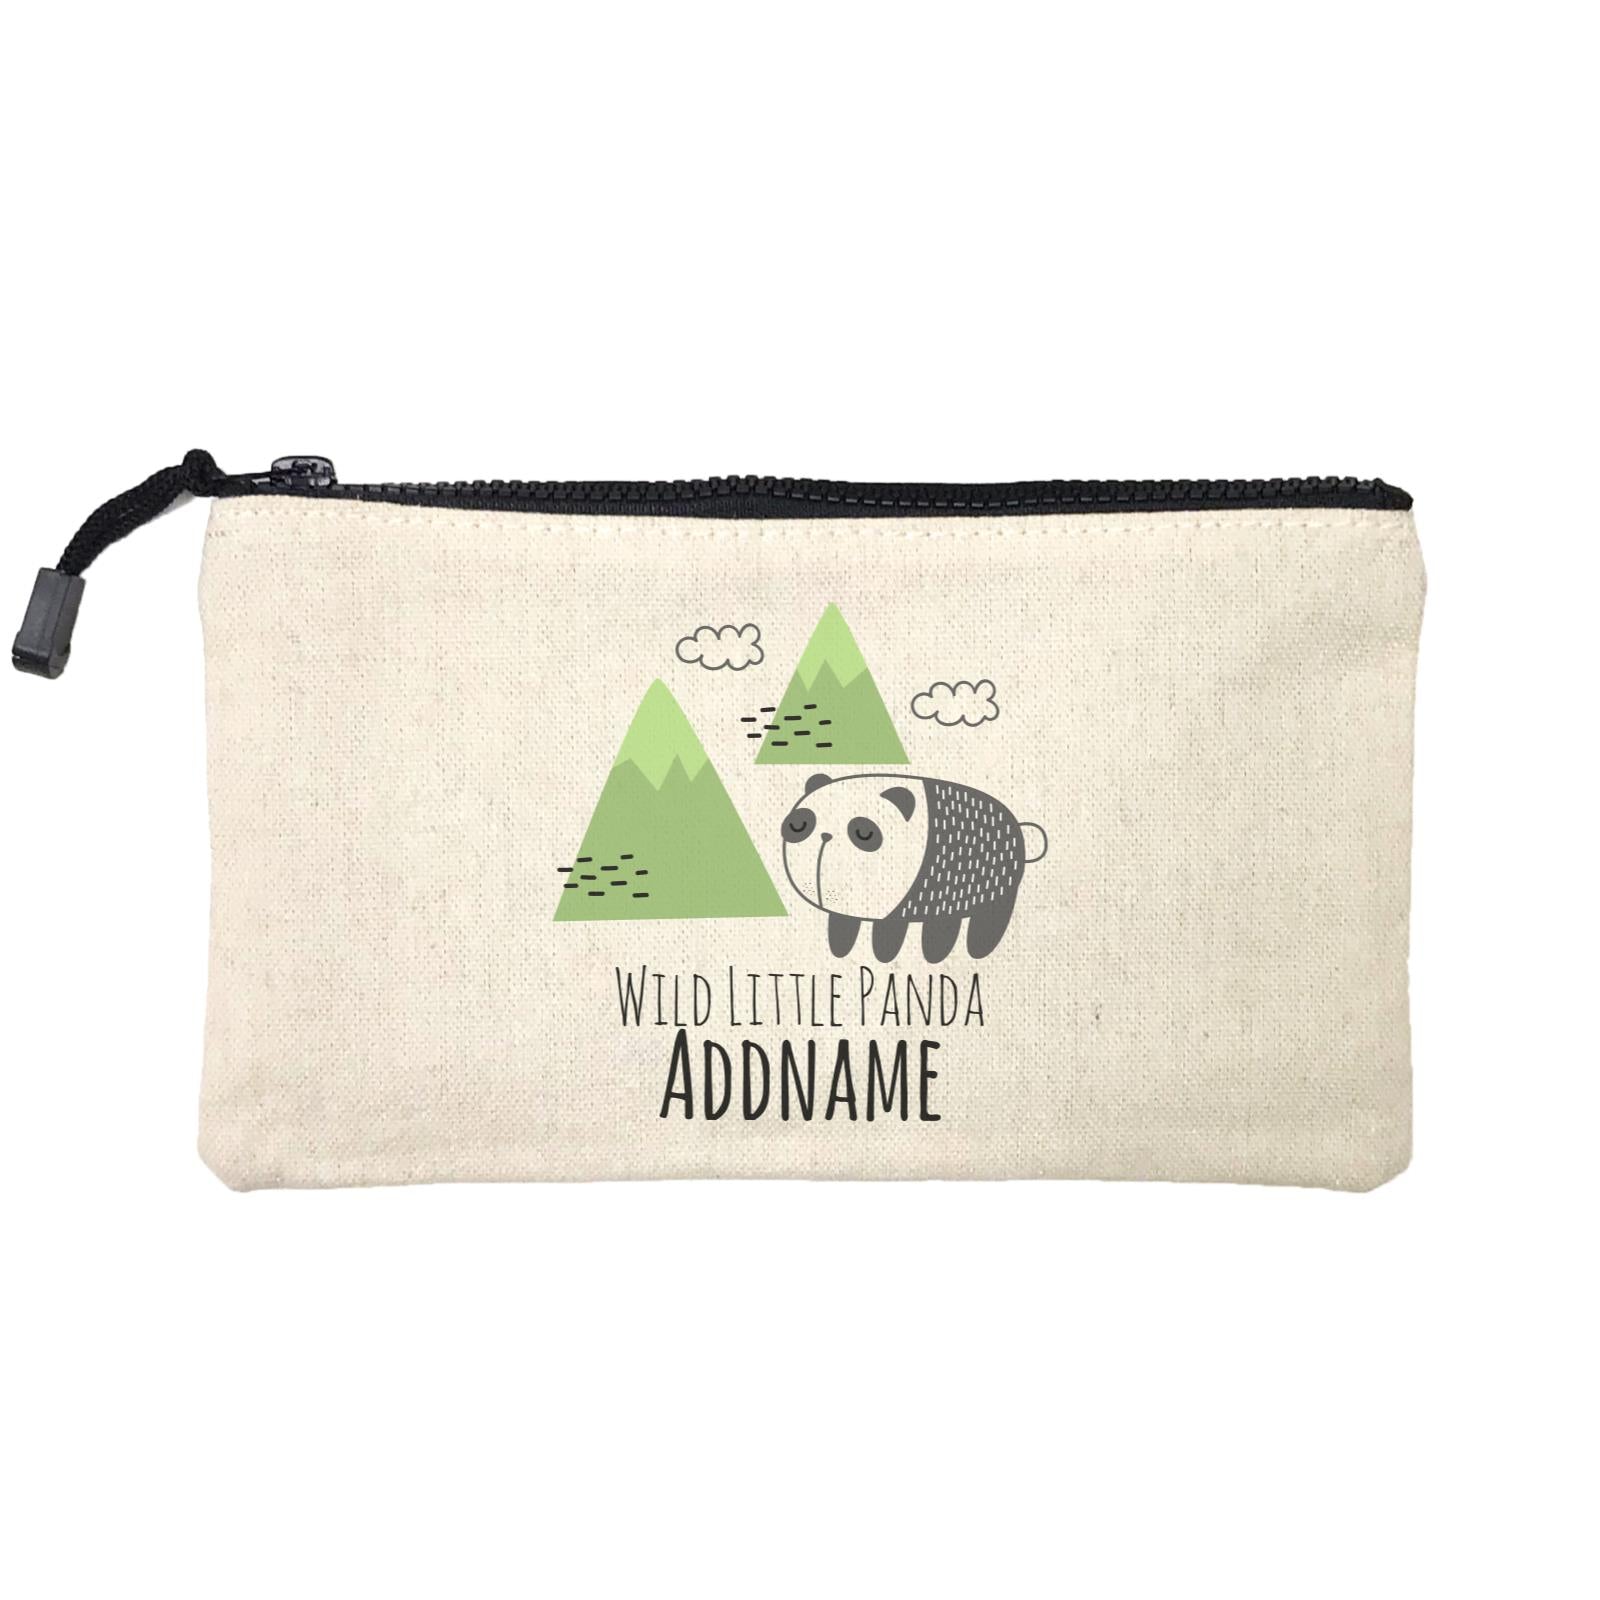 Drawn Adorable Animals Wild Little Panda Addname Mini Accessories Stationery Pouch